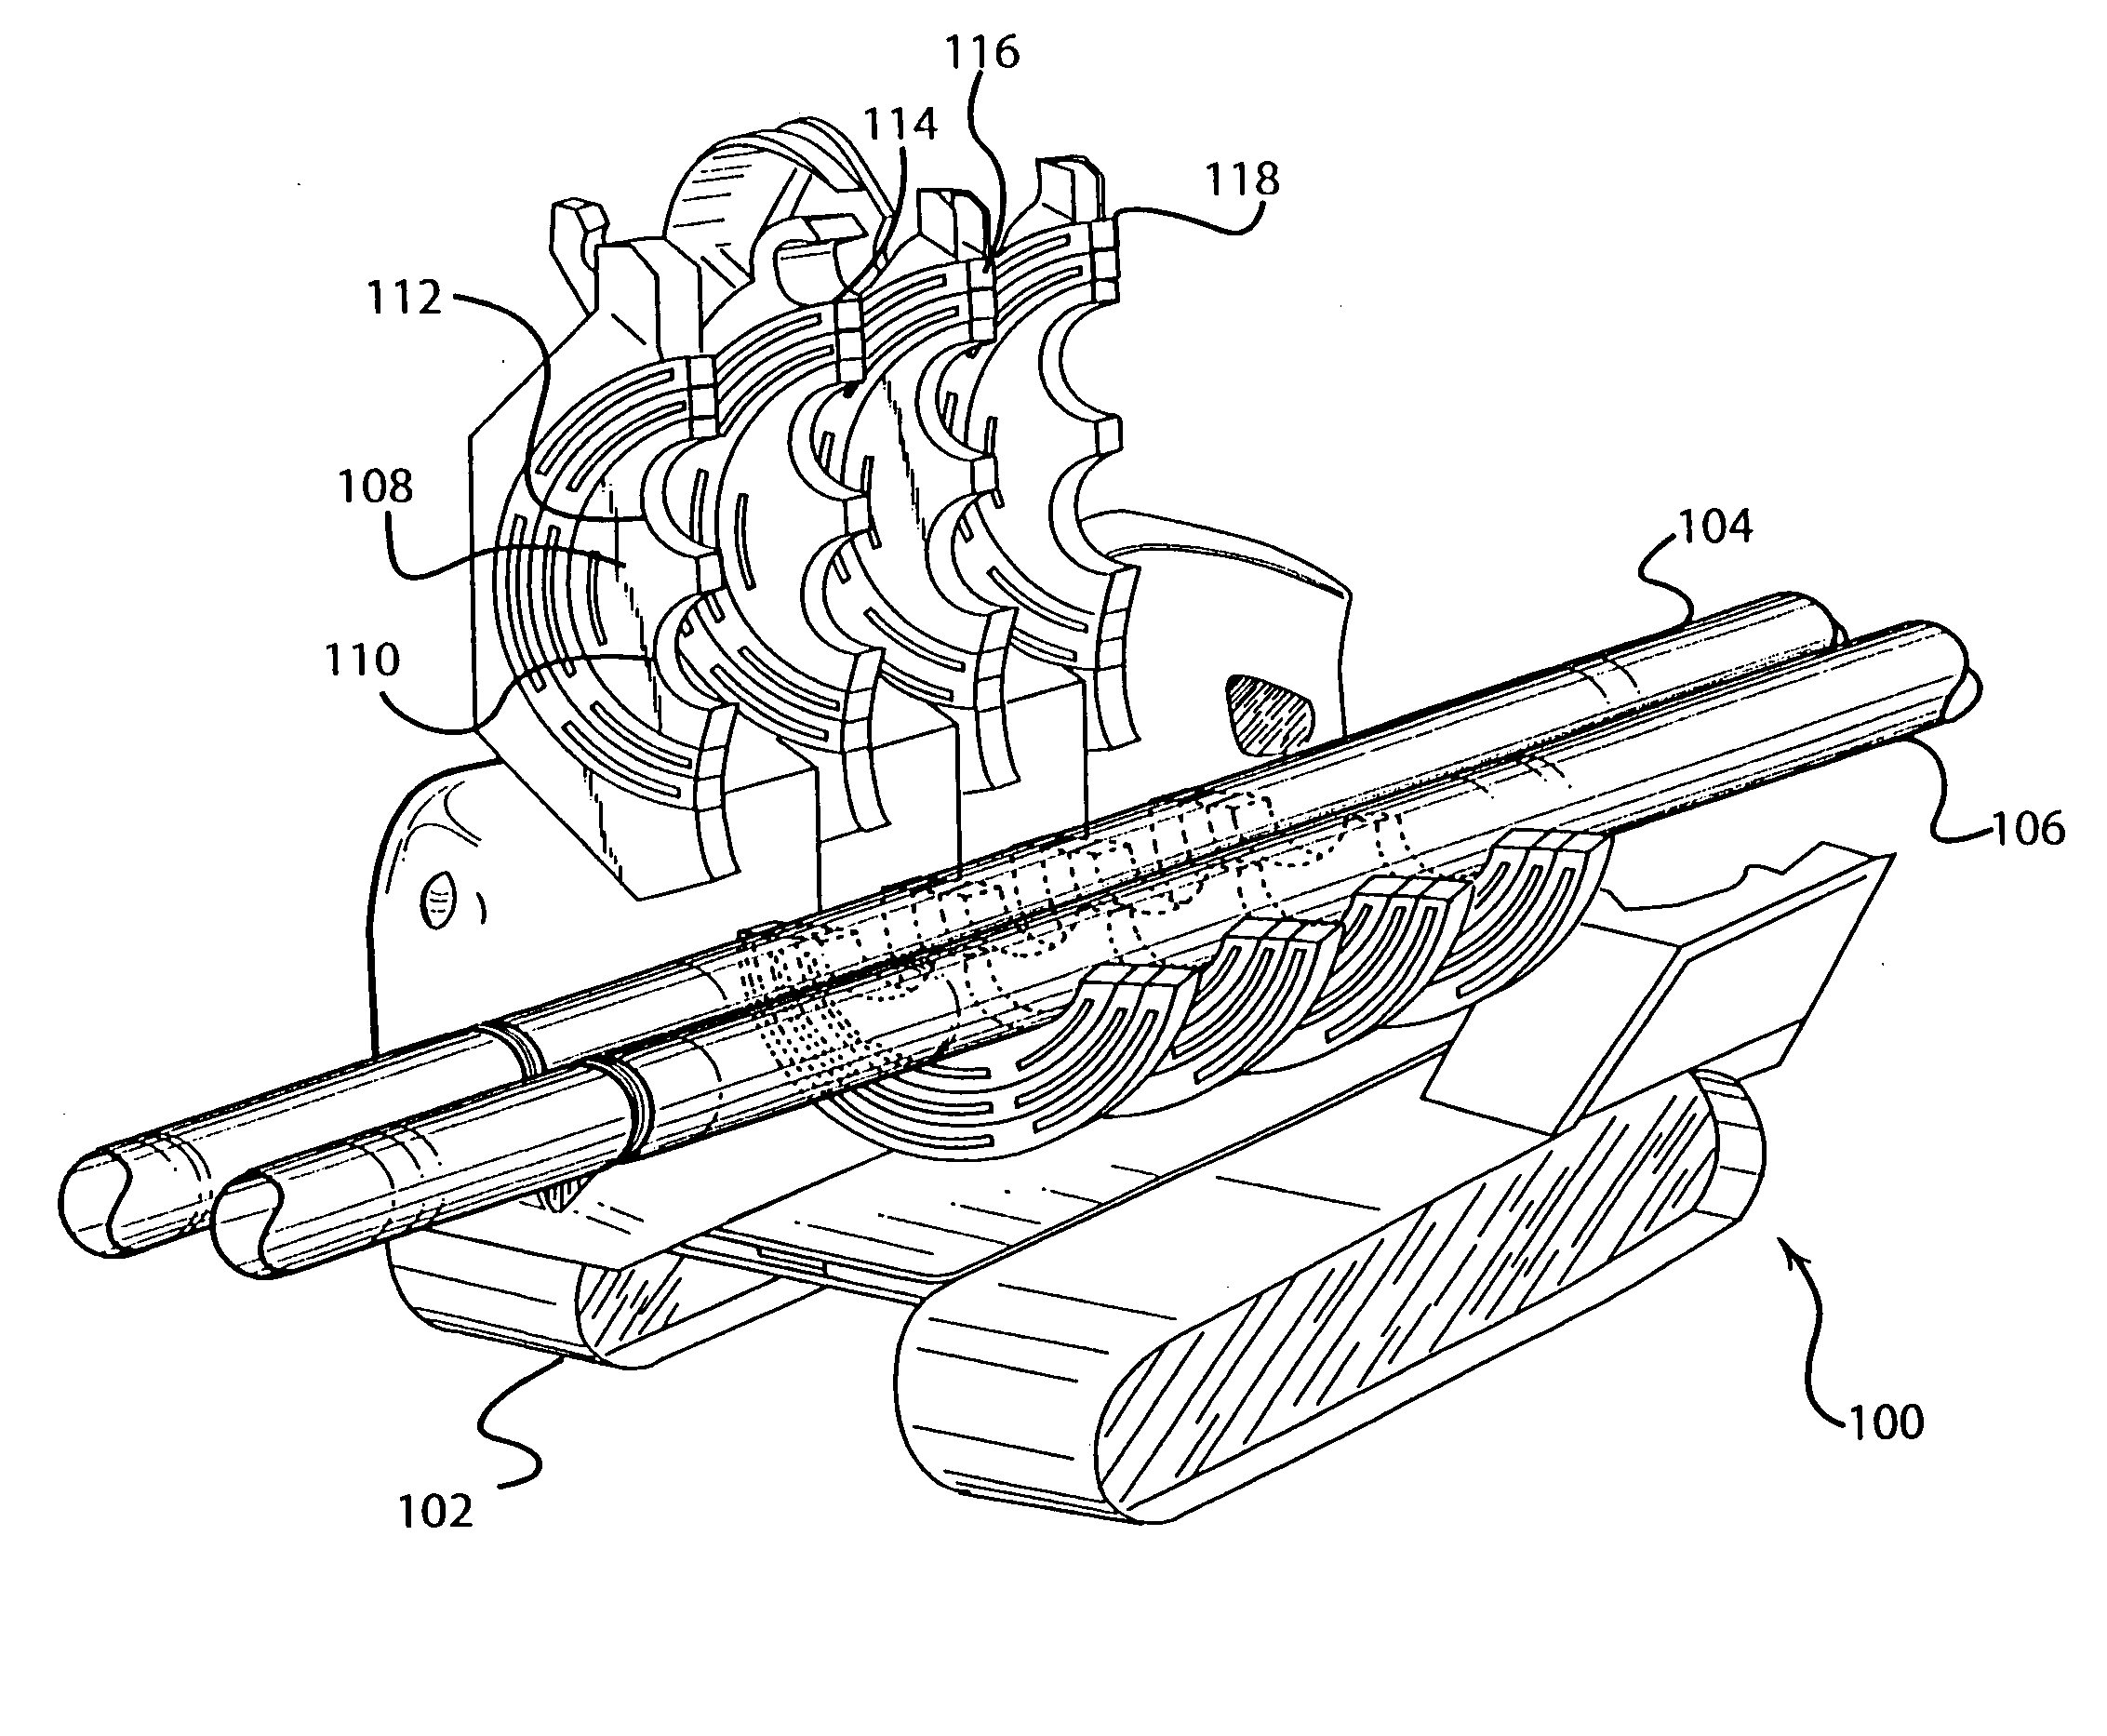 Pipe welder for simultaneously fusing a plurality of polyethylene pipes